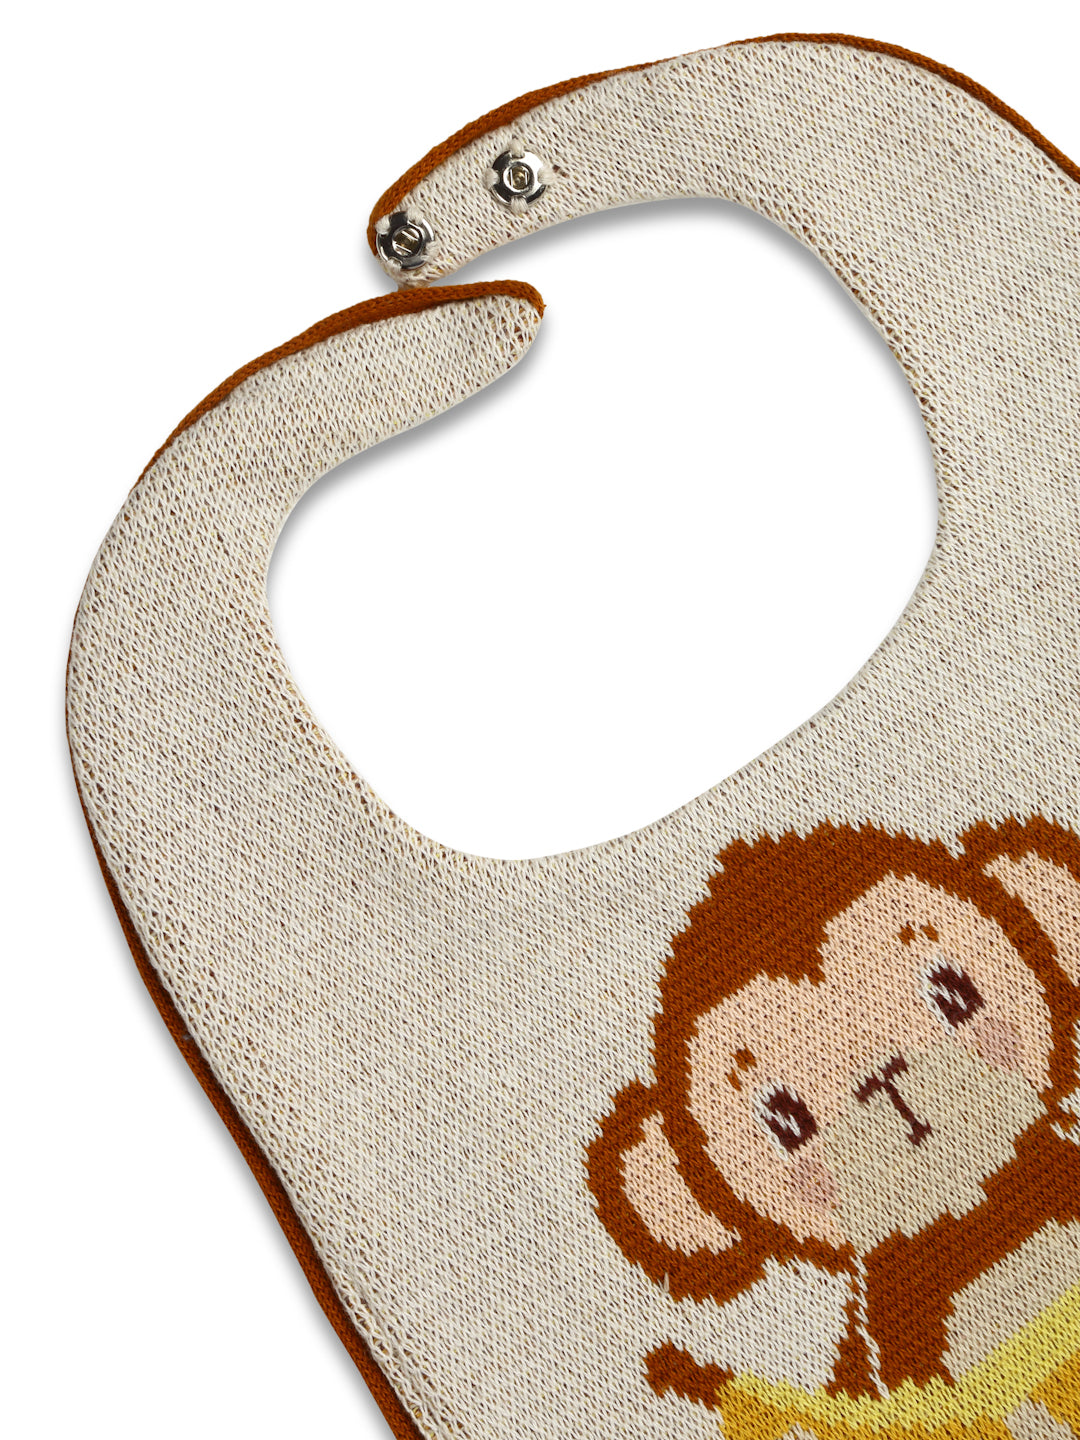 Monkey Knitted Bib for babies